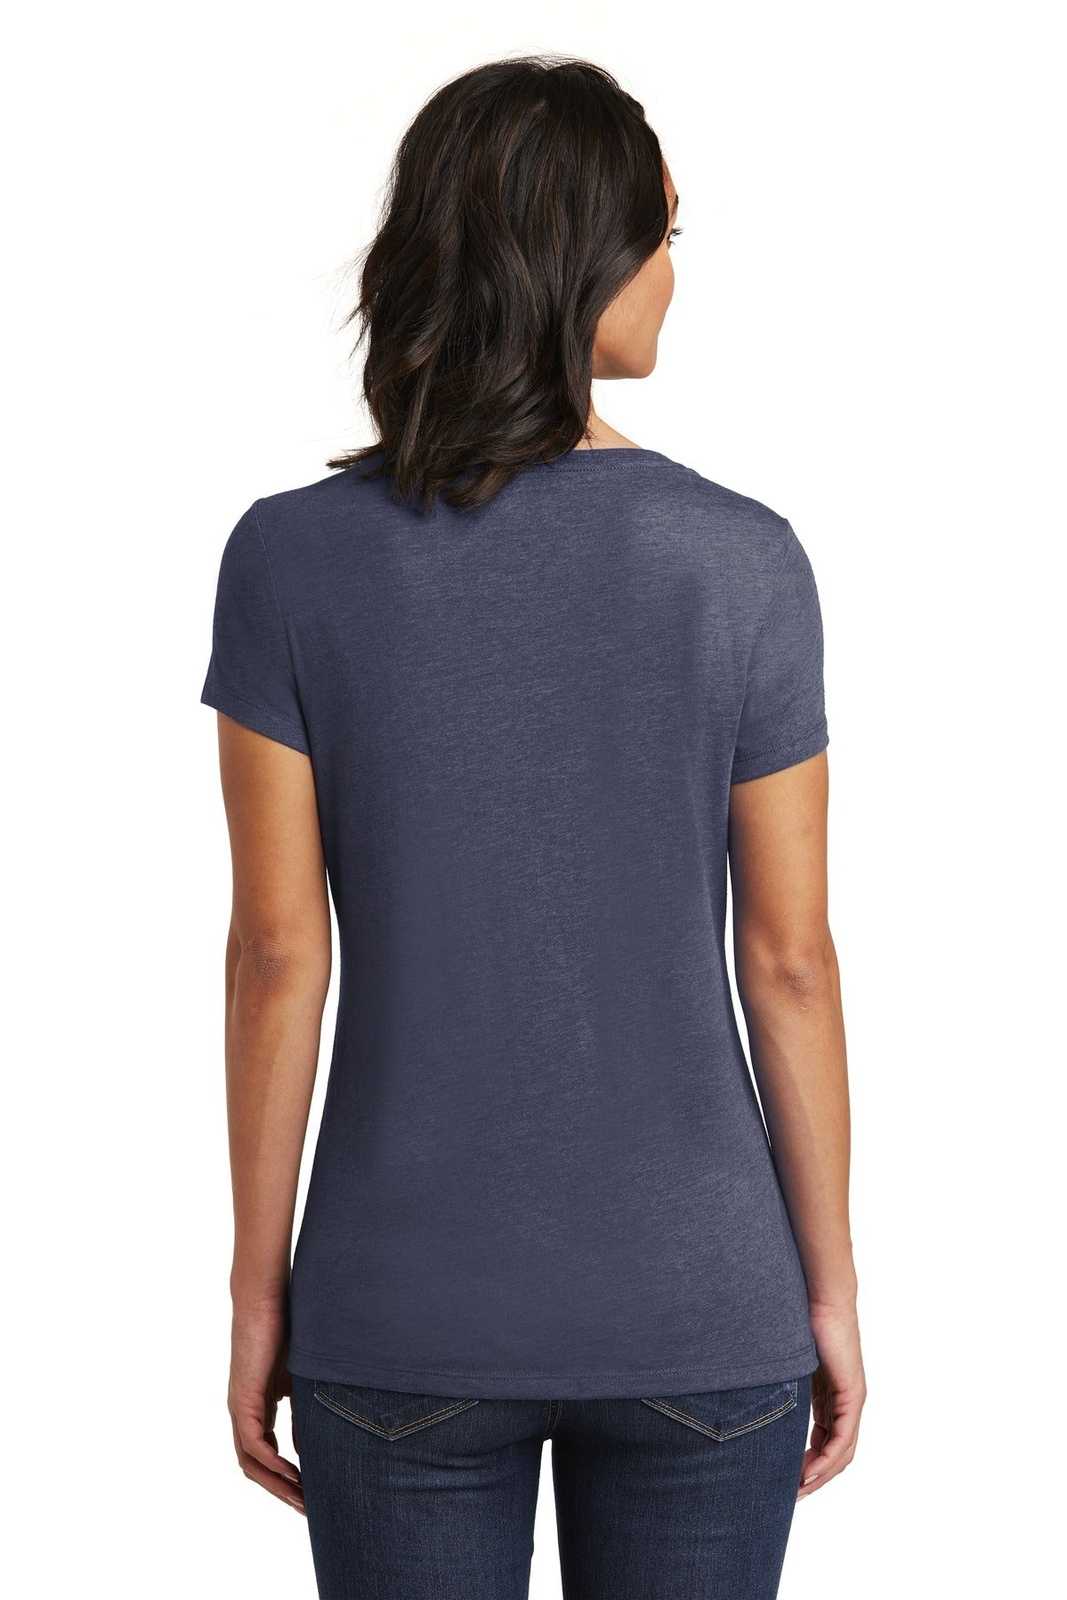 District DT6503 Women's Very Important Tee V-Neck - Heathered Navy - HIT a Double - 1